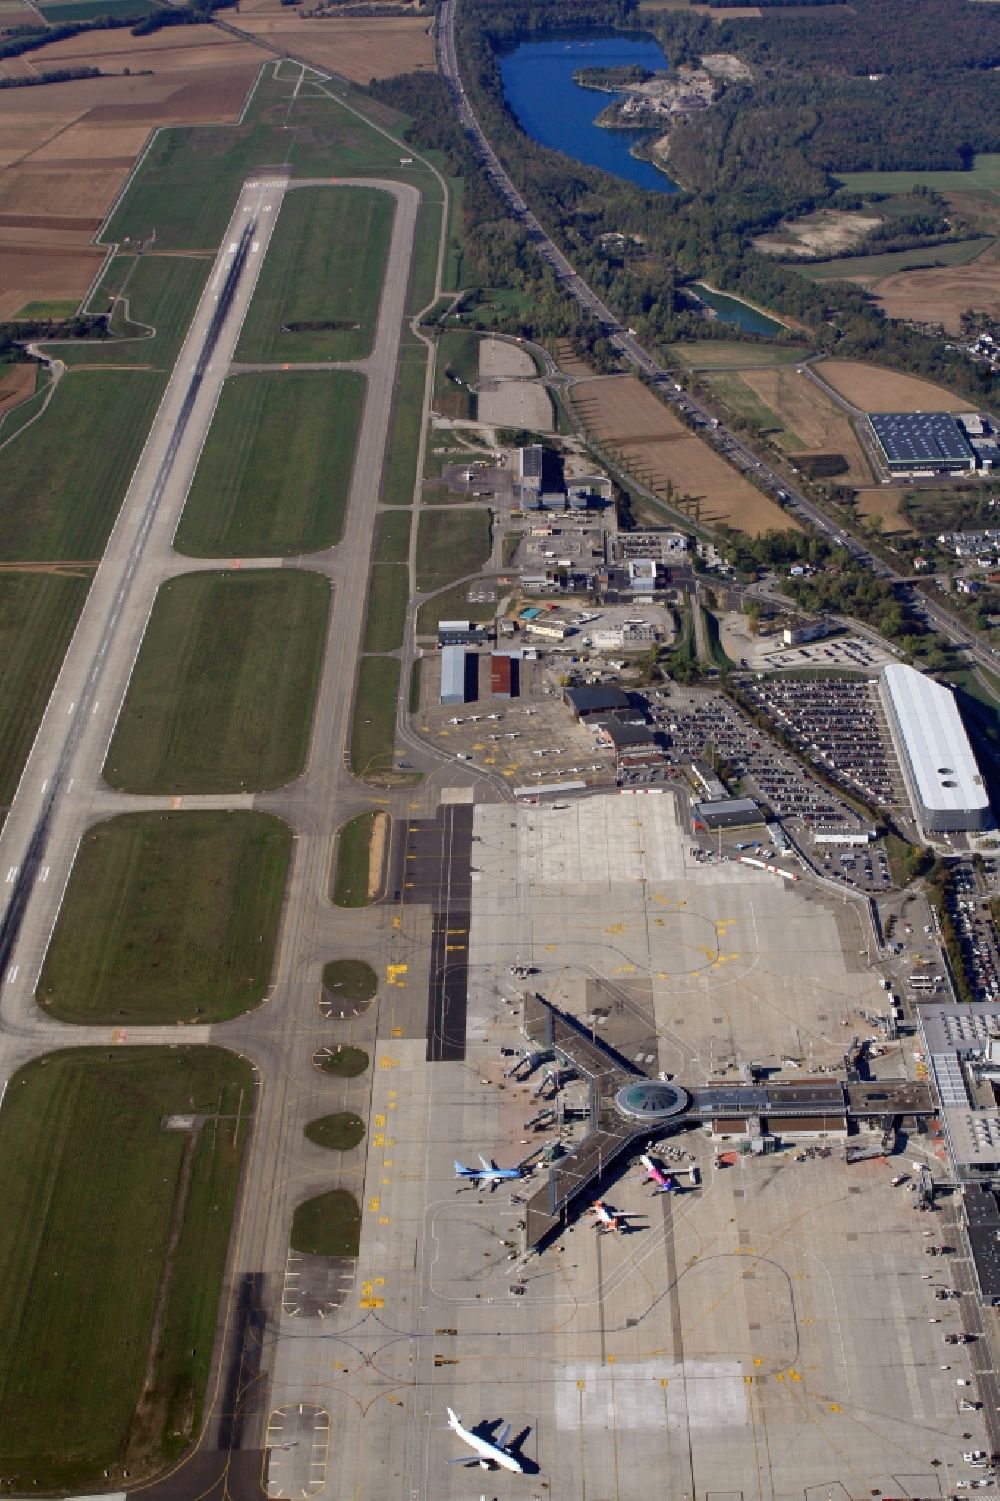 Aerial photograph Saint-Louis - Terminal area and tarmac on the grounds of the international airport Euroairport in Saint-Louis in Alsace-Champagne-Ardenne-Lorraine, France